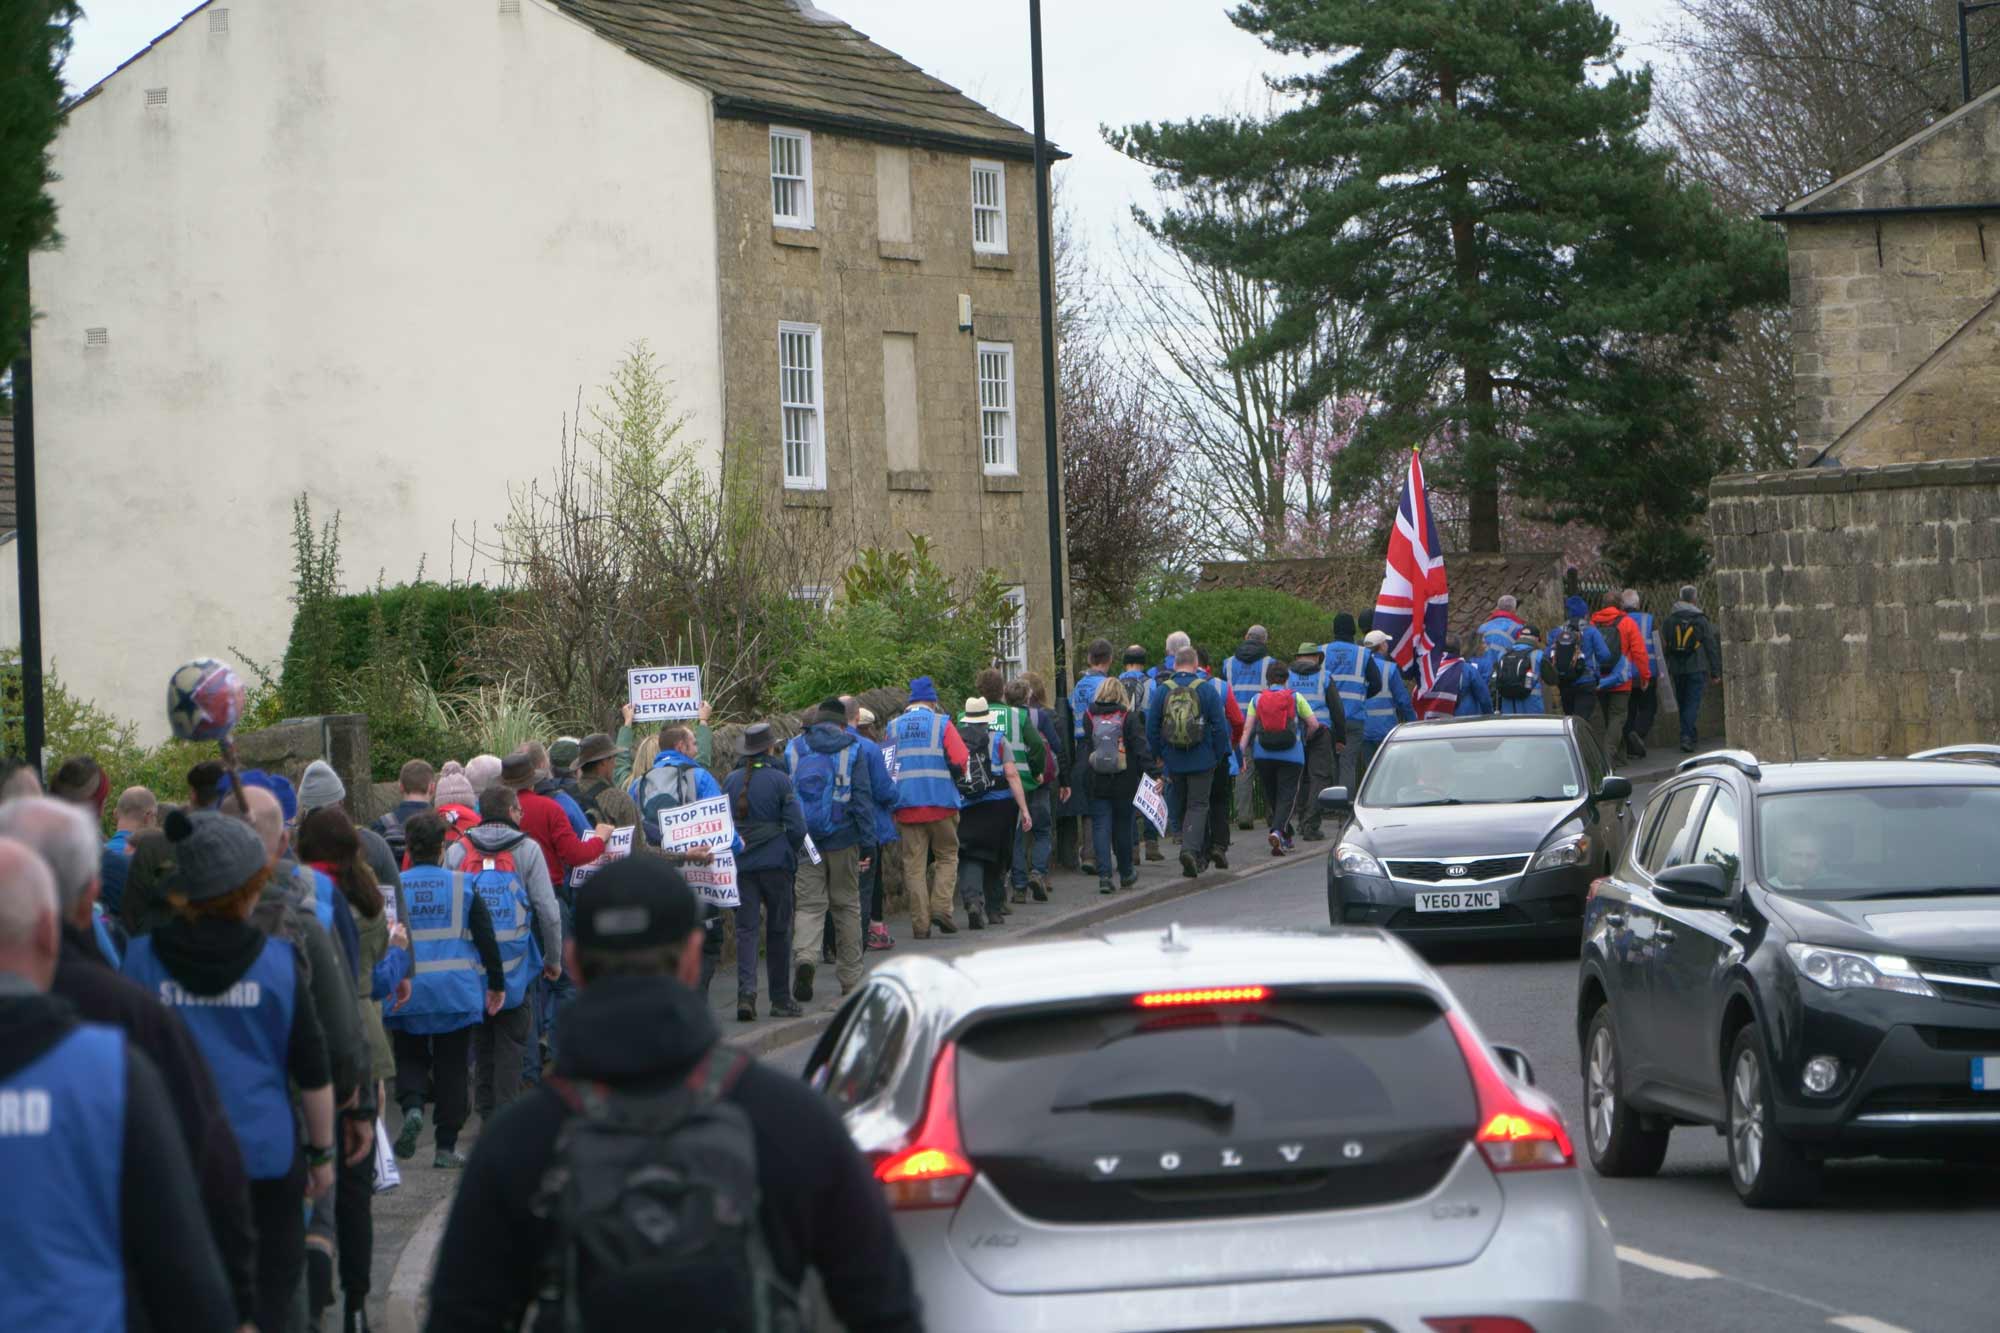 March To Leave stops off in Knaresborough